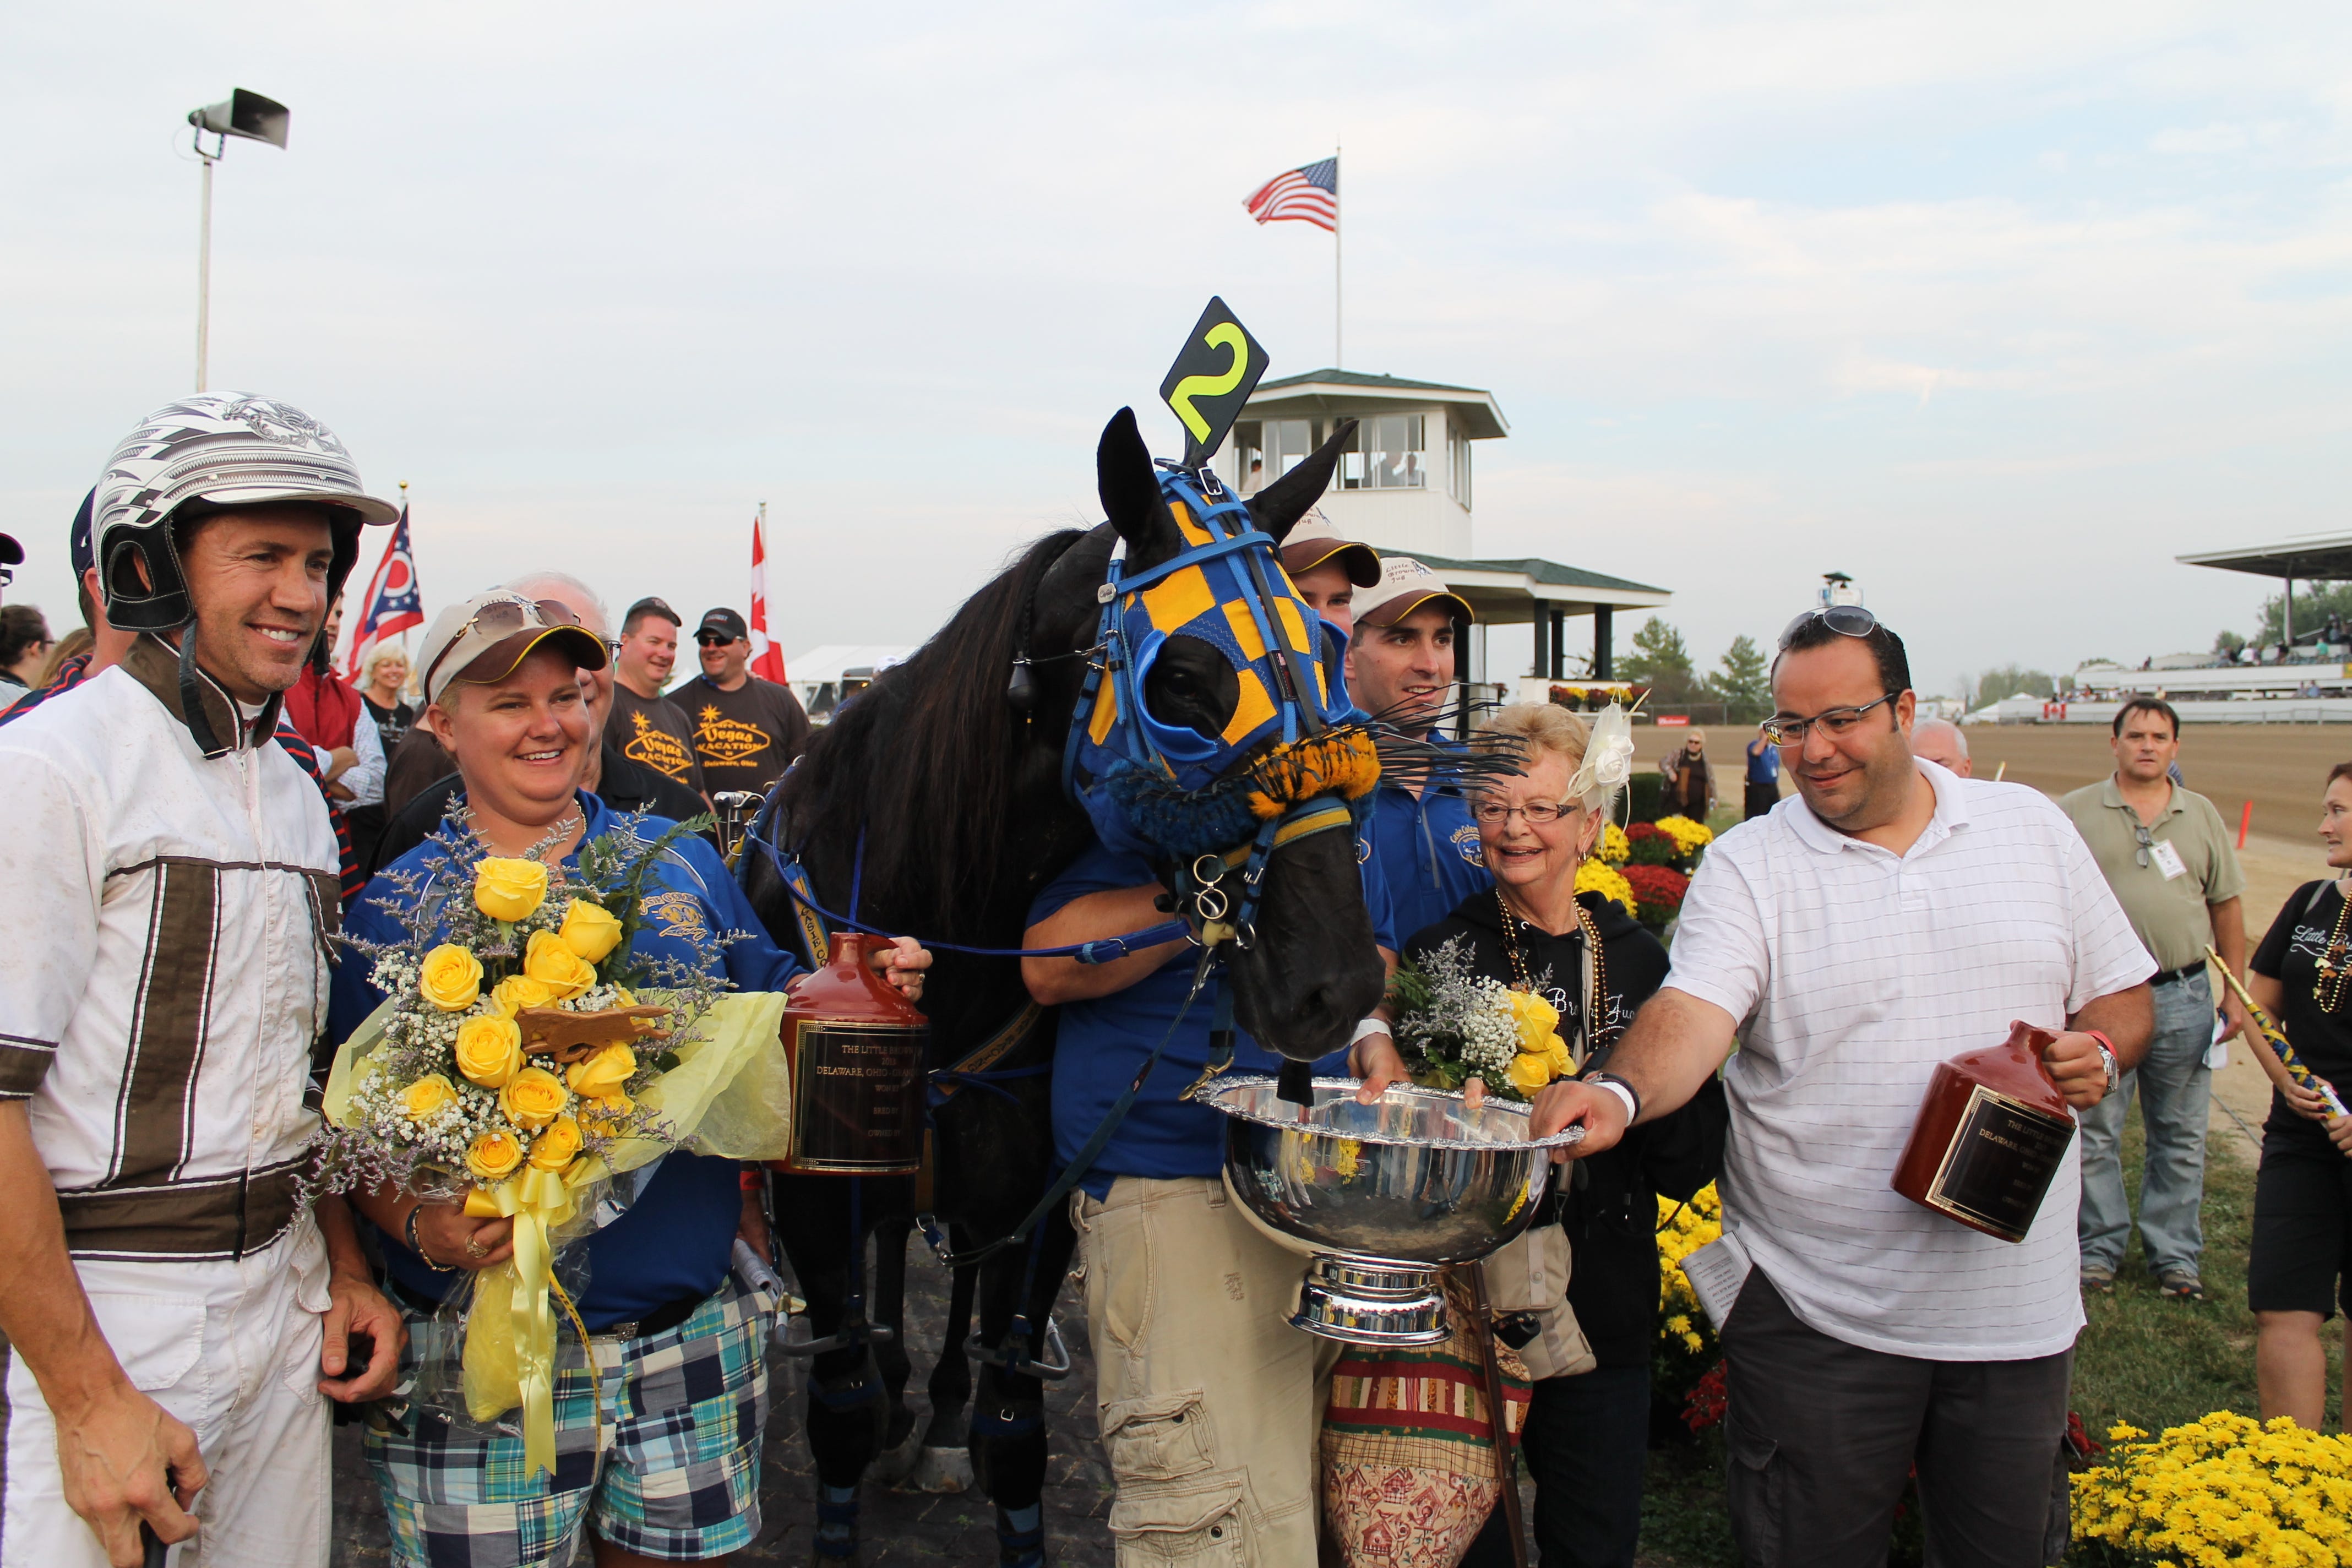 Delaware County Fair Vegas Vacation wins the Little Brown Jug